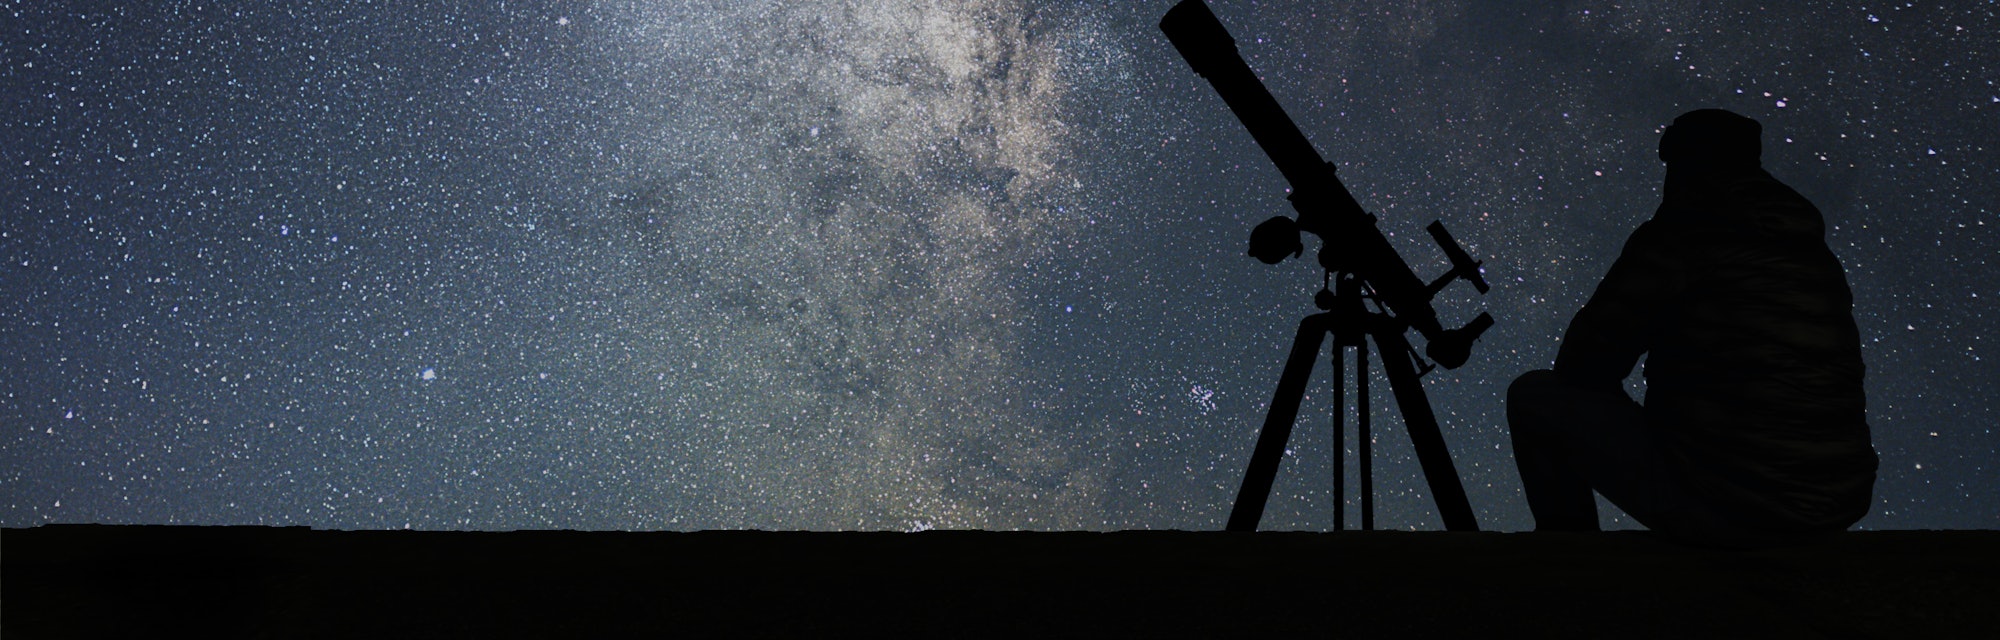 Man with astronomy  telescope looking at the stars. Man telescope and starry sky. Night sky. Milky w...